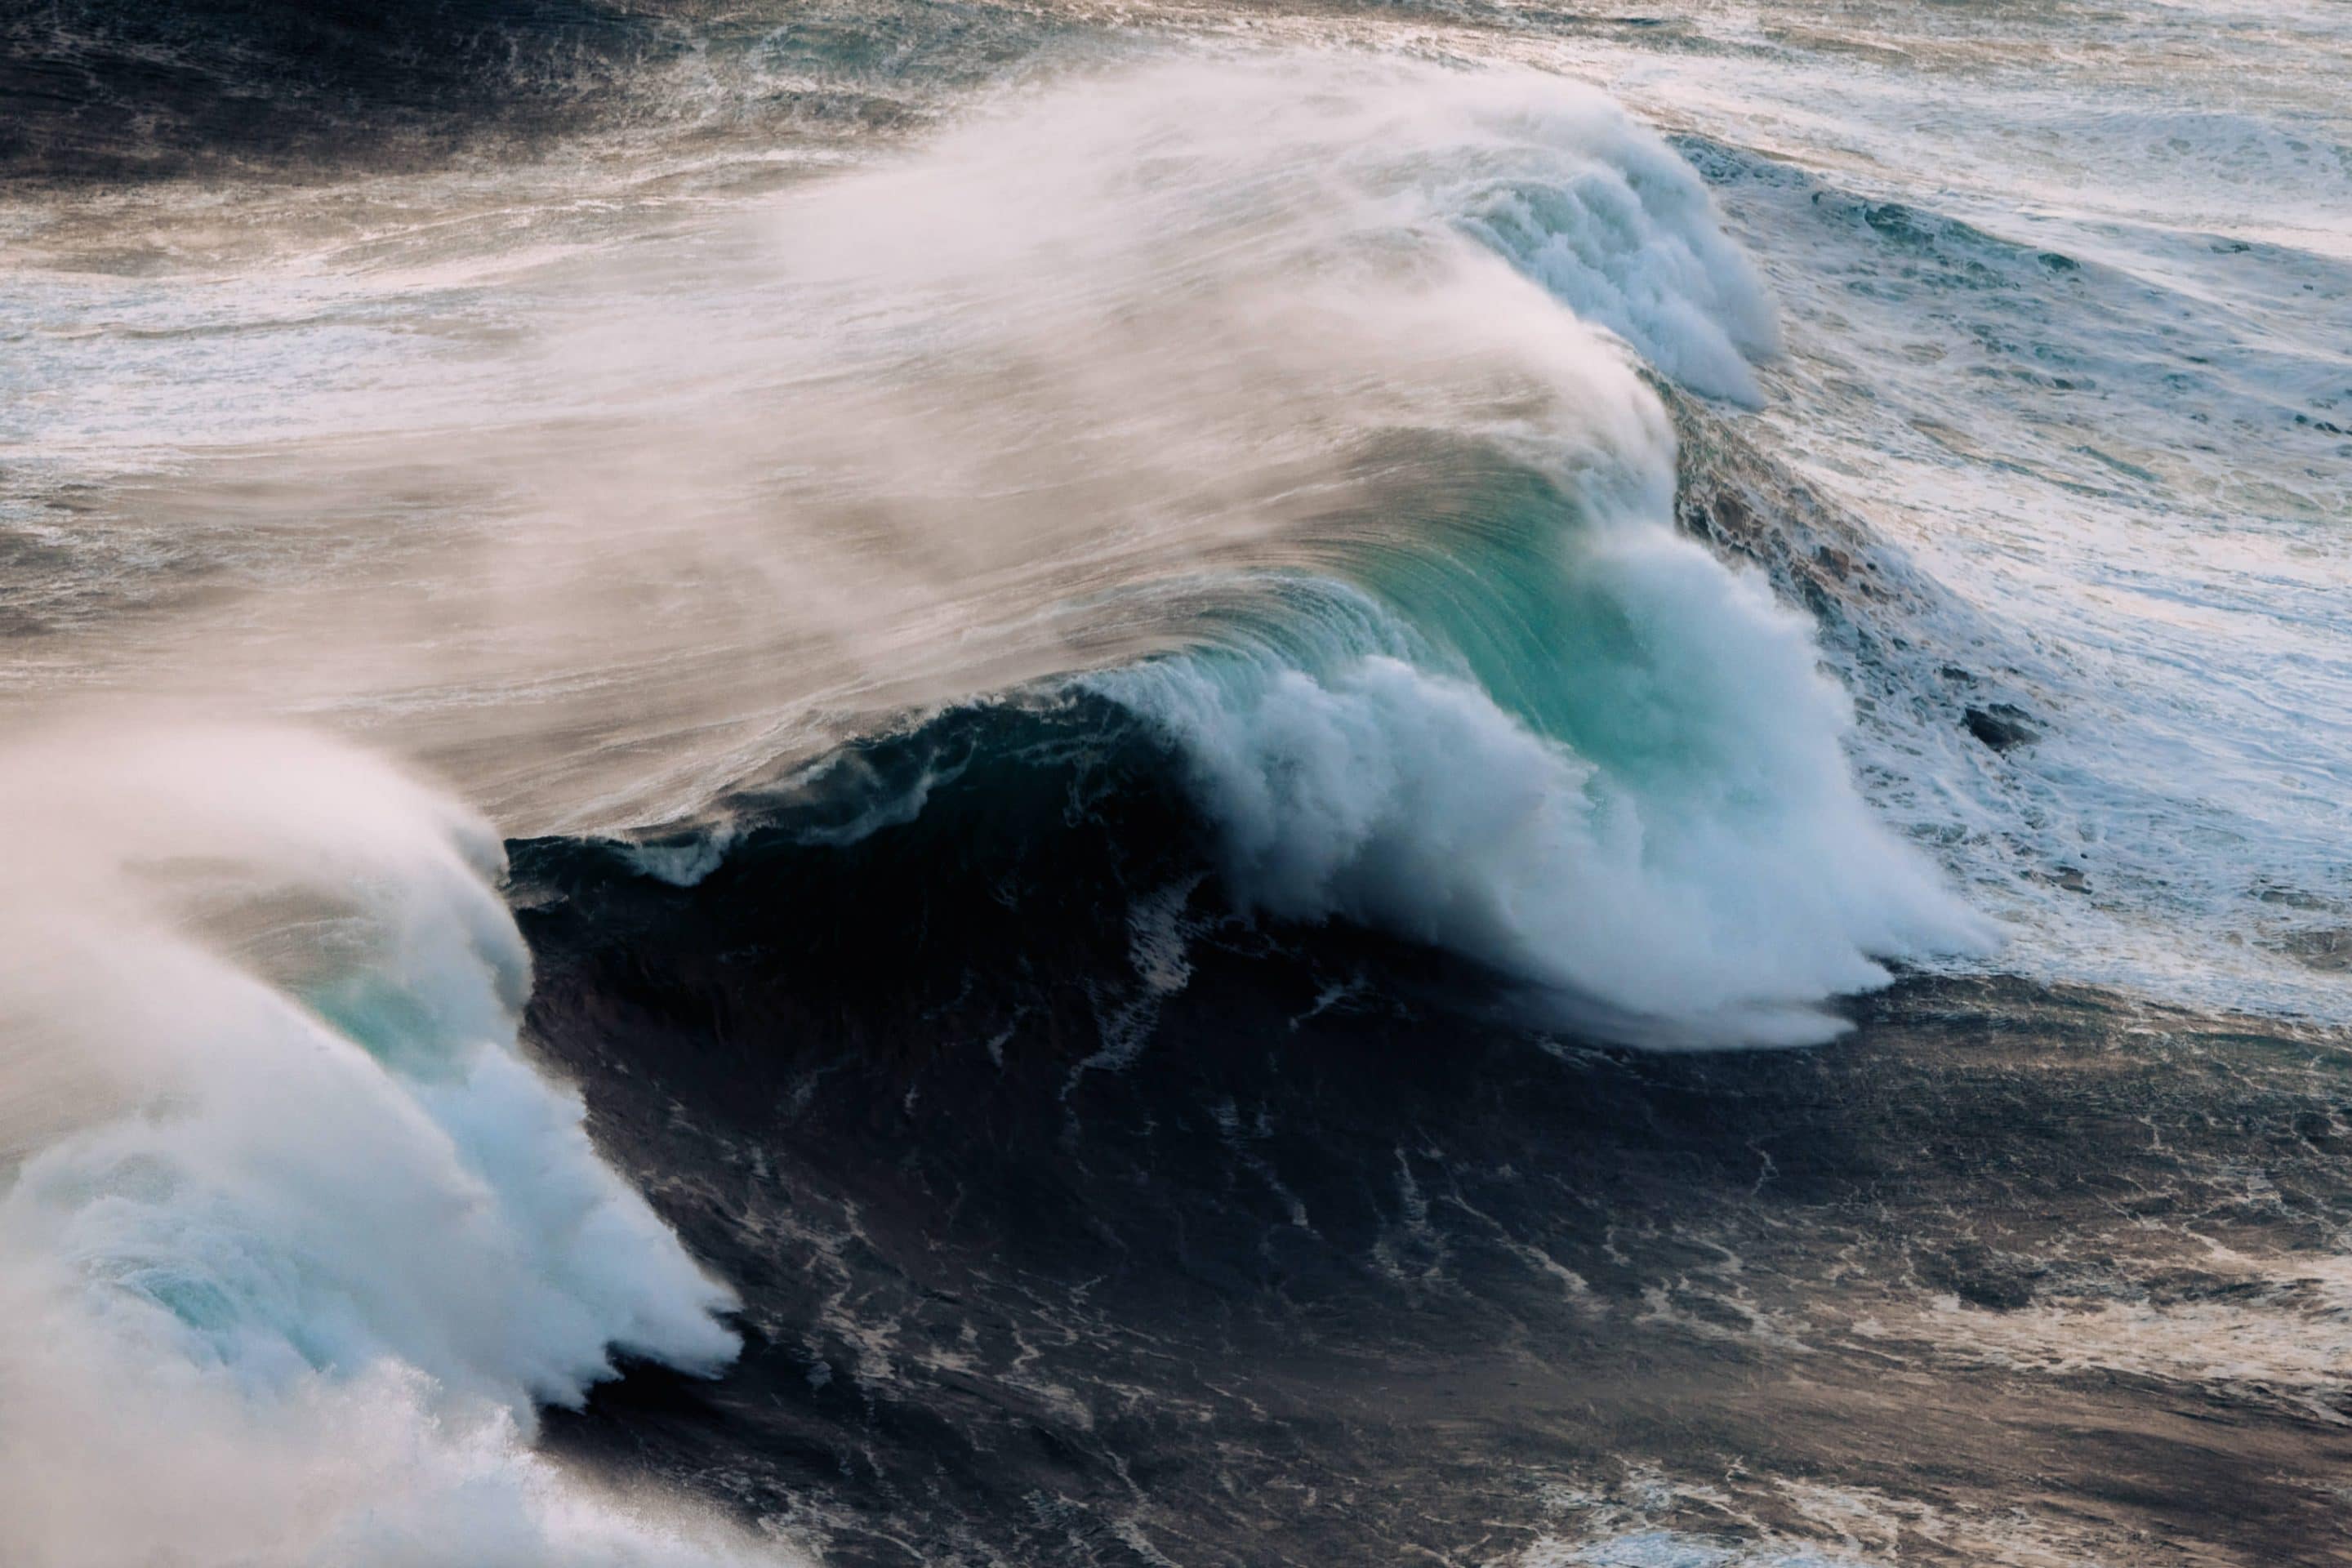 Waves crashing on the Atlantic coast at Nazaré, Portugal during a beautiful sunset by photographer Michael Schauer